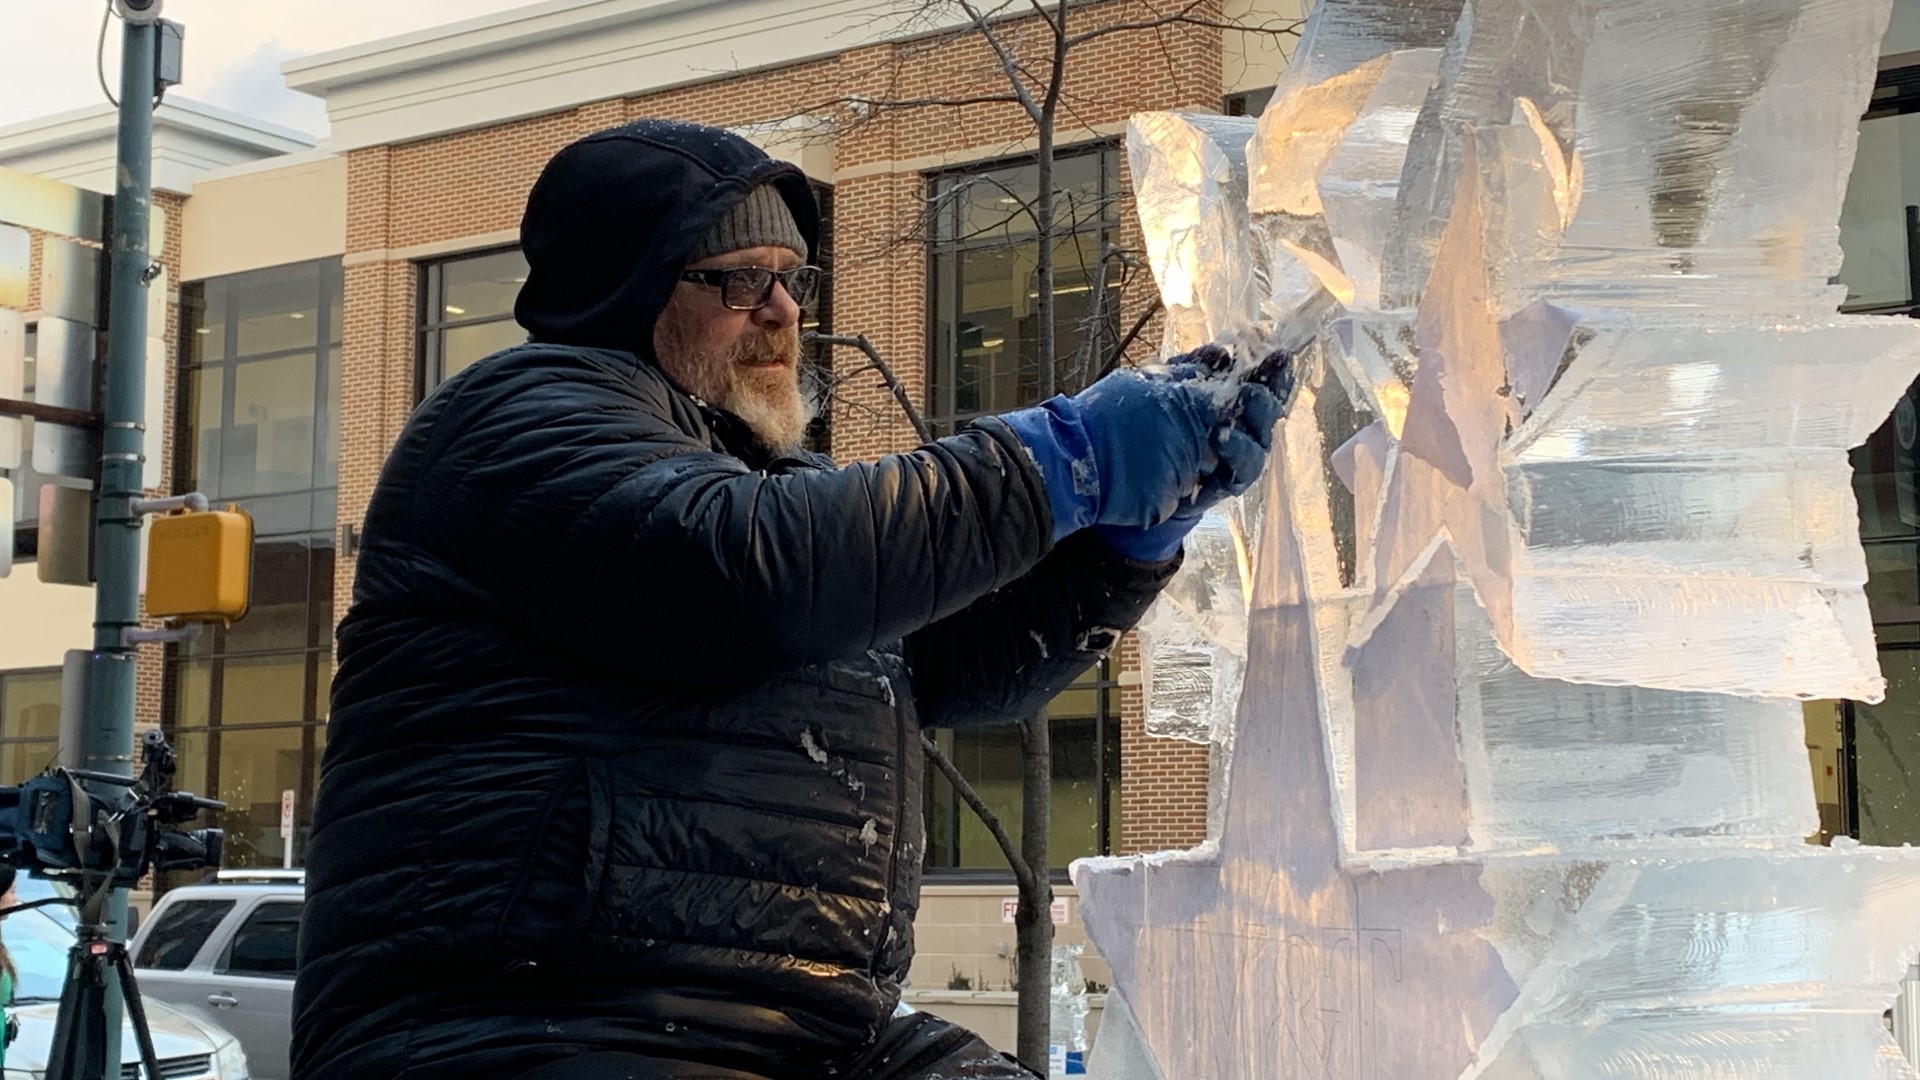 Chambersburg covered in ice for the 21st annual IceFest